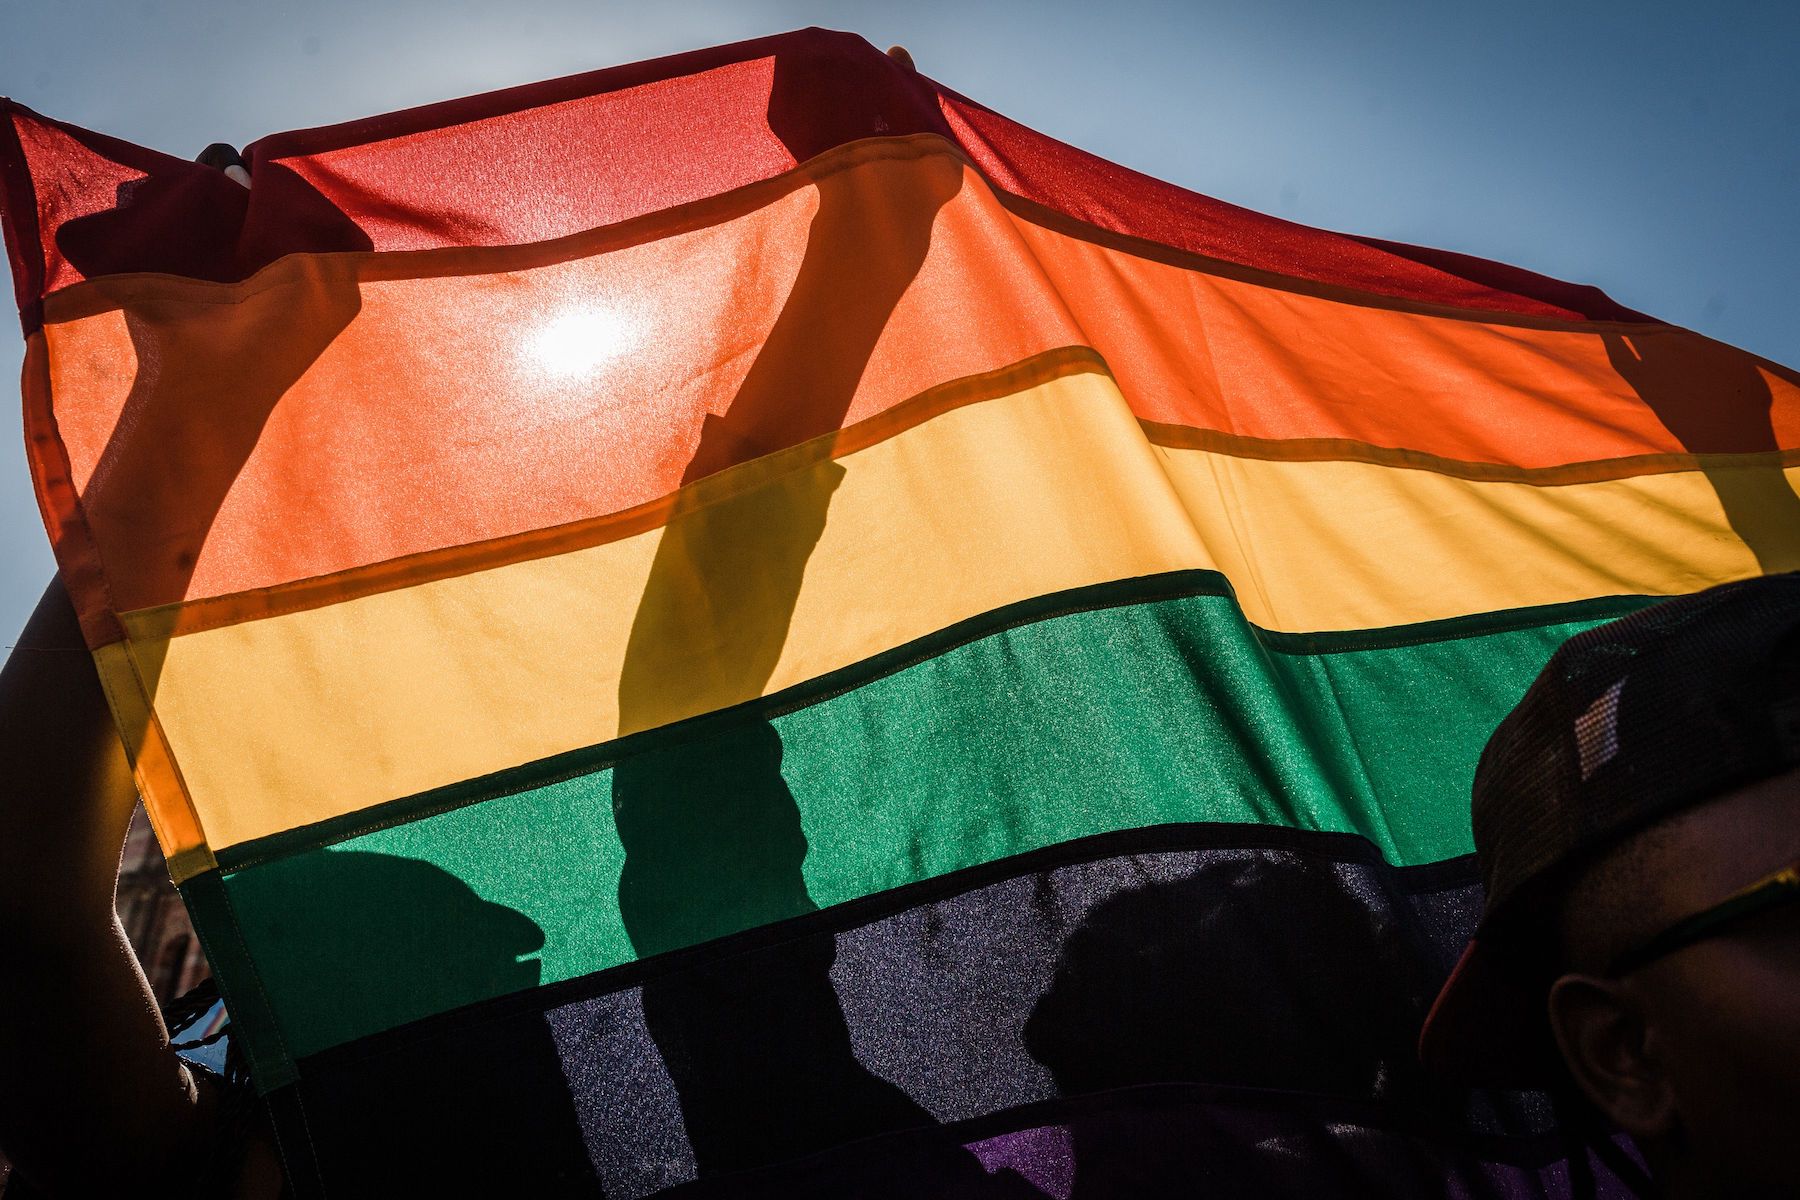 Ghana Has Passed A Bill That Would Make It A Crime For People To Identify As LGBTQ